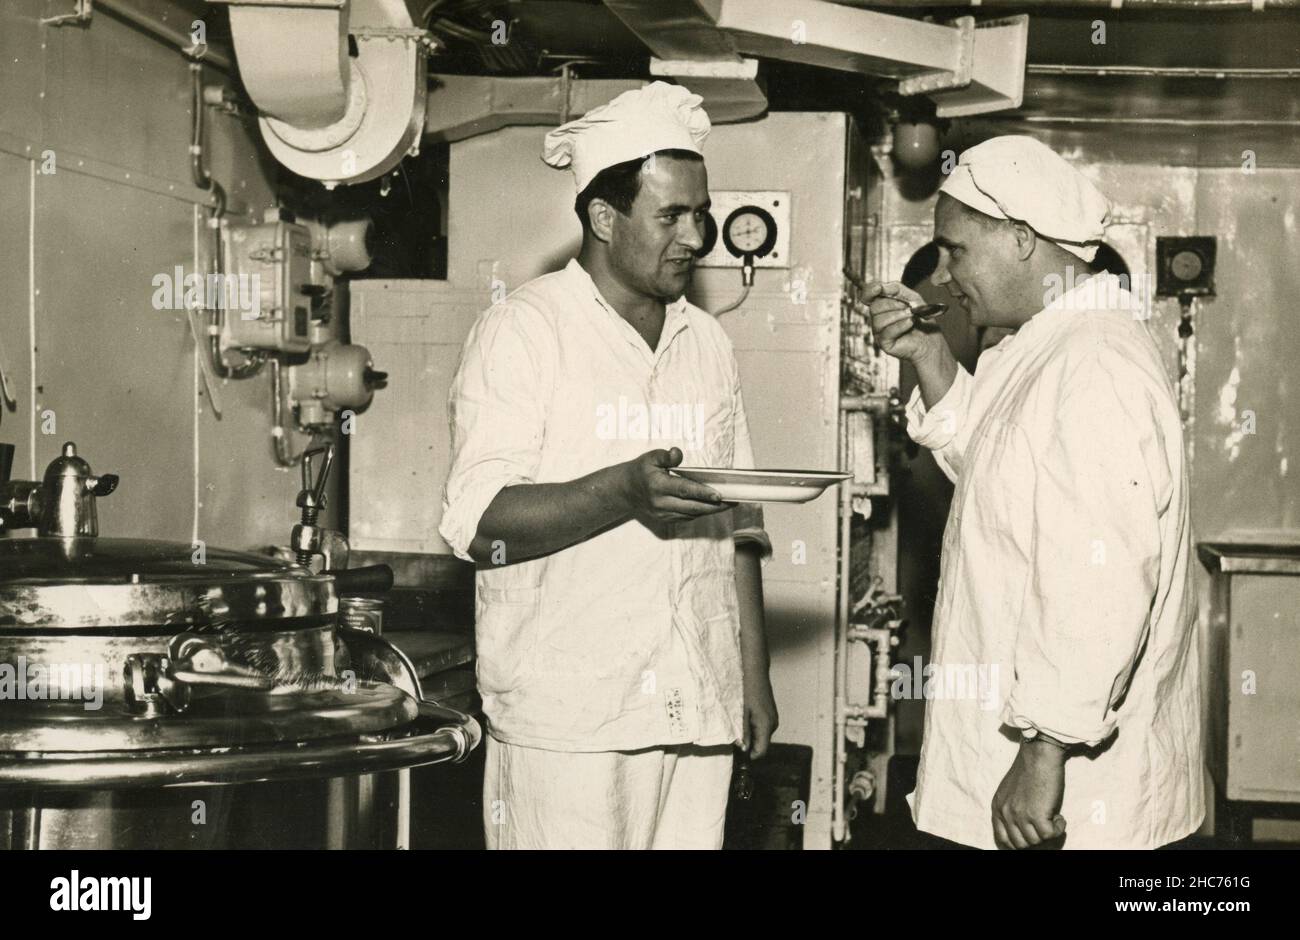 Cooks tasting the food onboard the ship, Italy 1950s Stock Photo